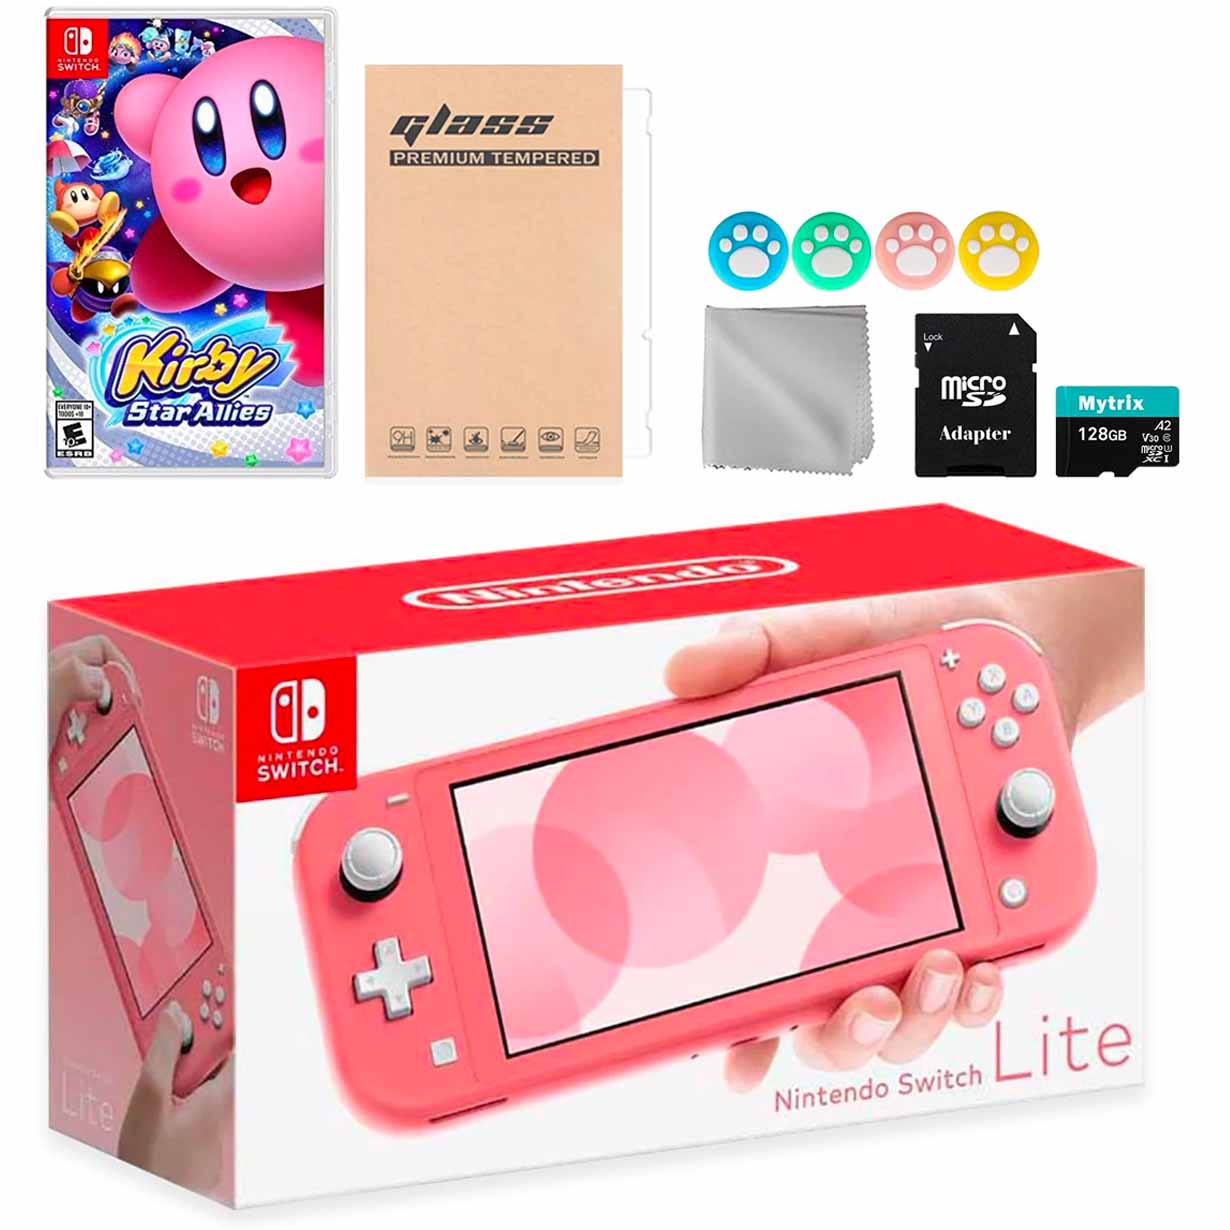 nintendo switch lite in coral with kirby star allies game and accessories